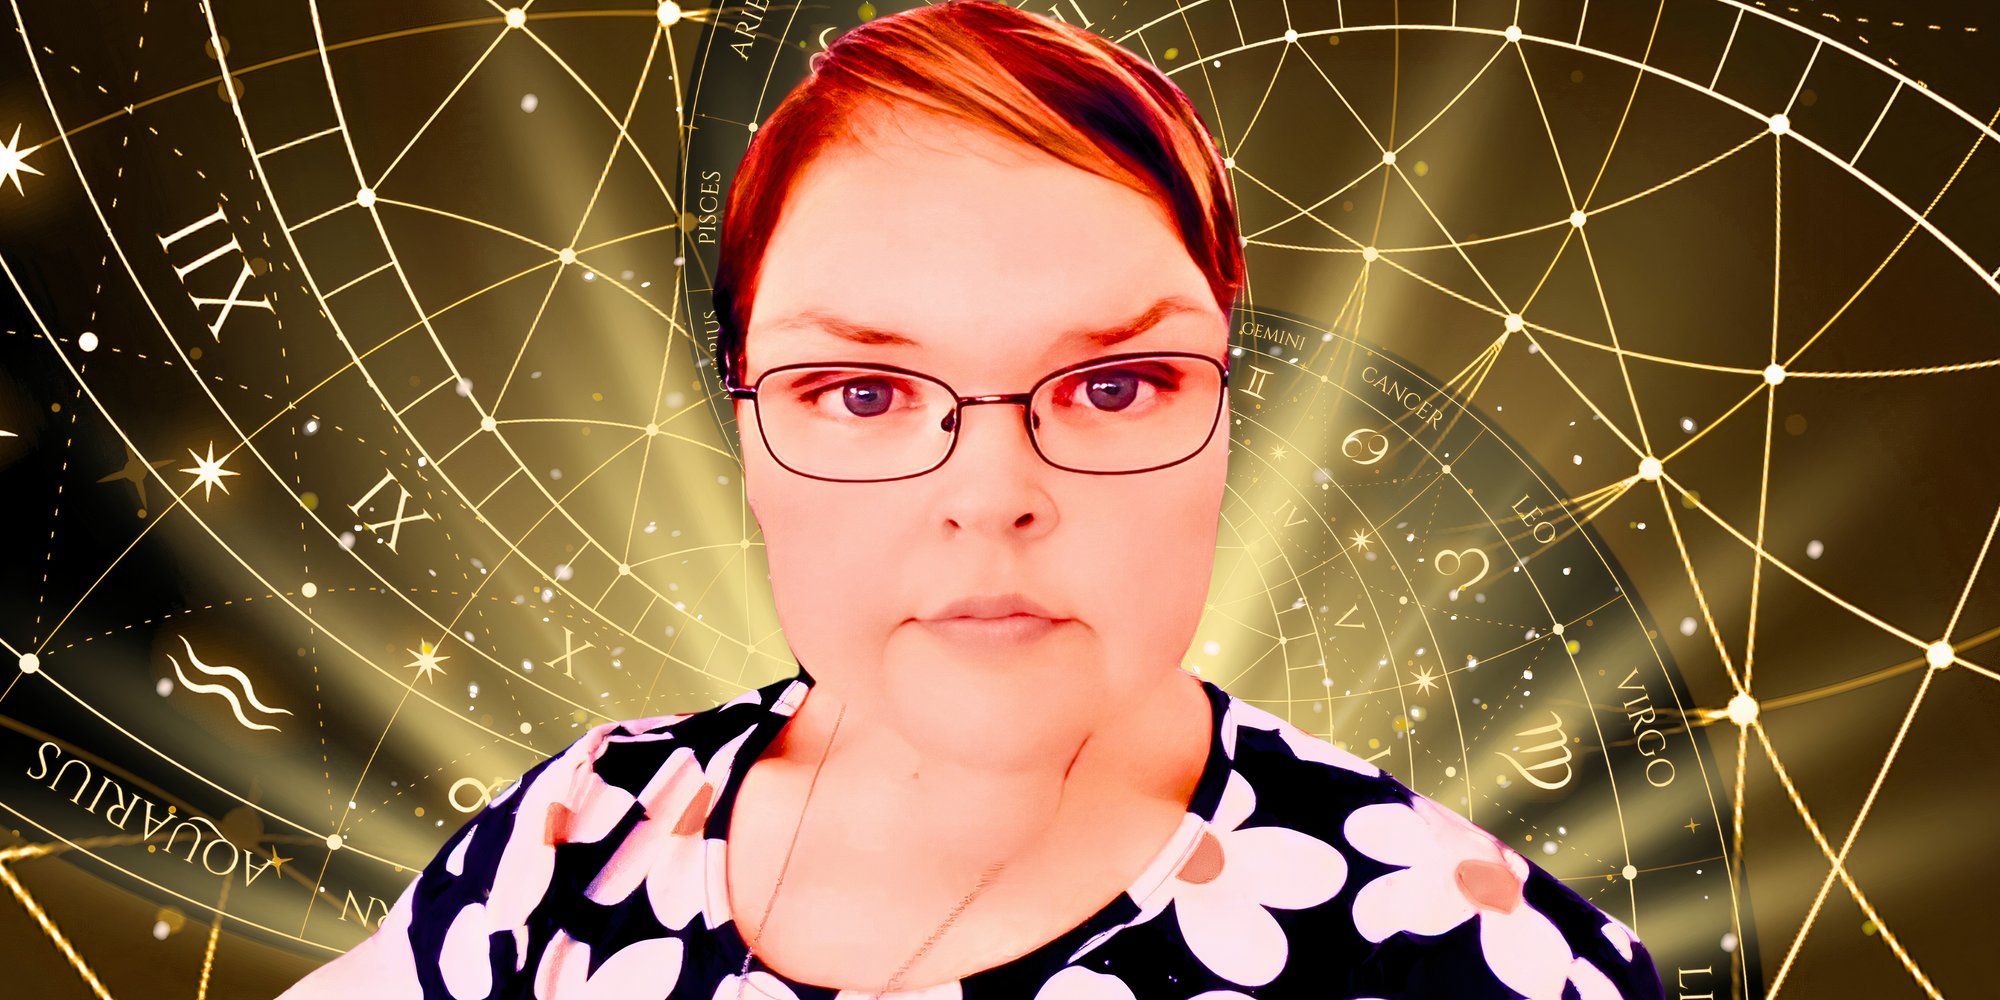 tammy slaton from 1000 lb sisters in montage with zodiac-themed background